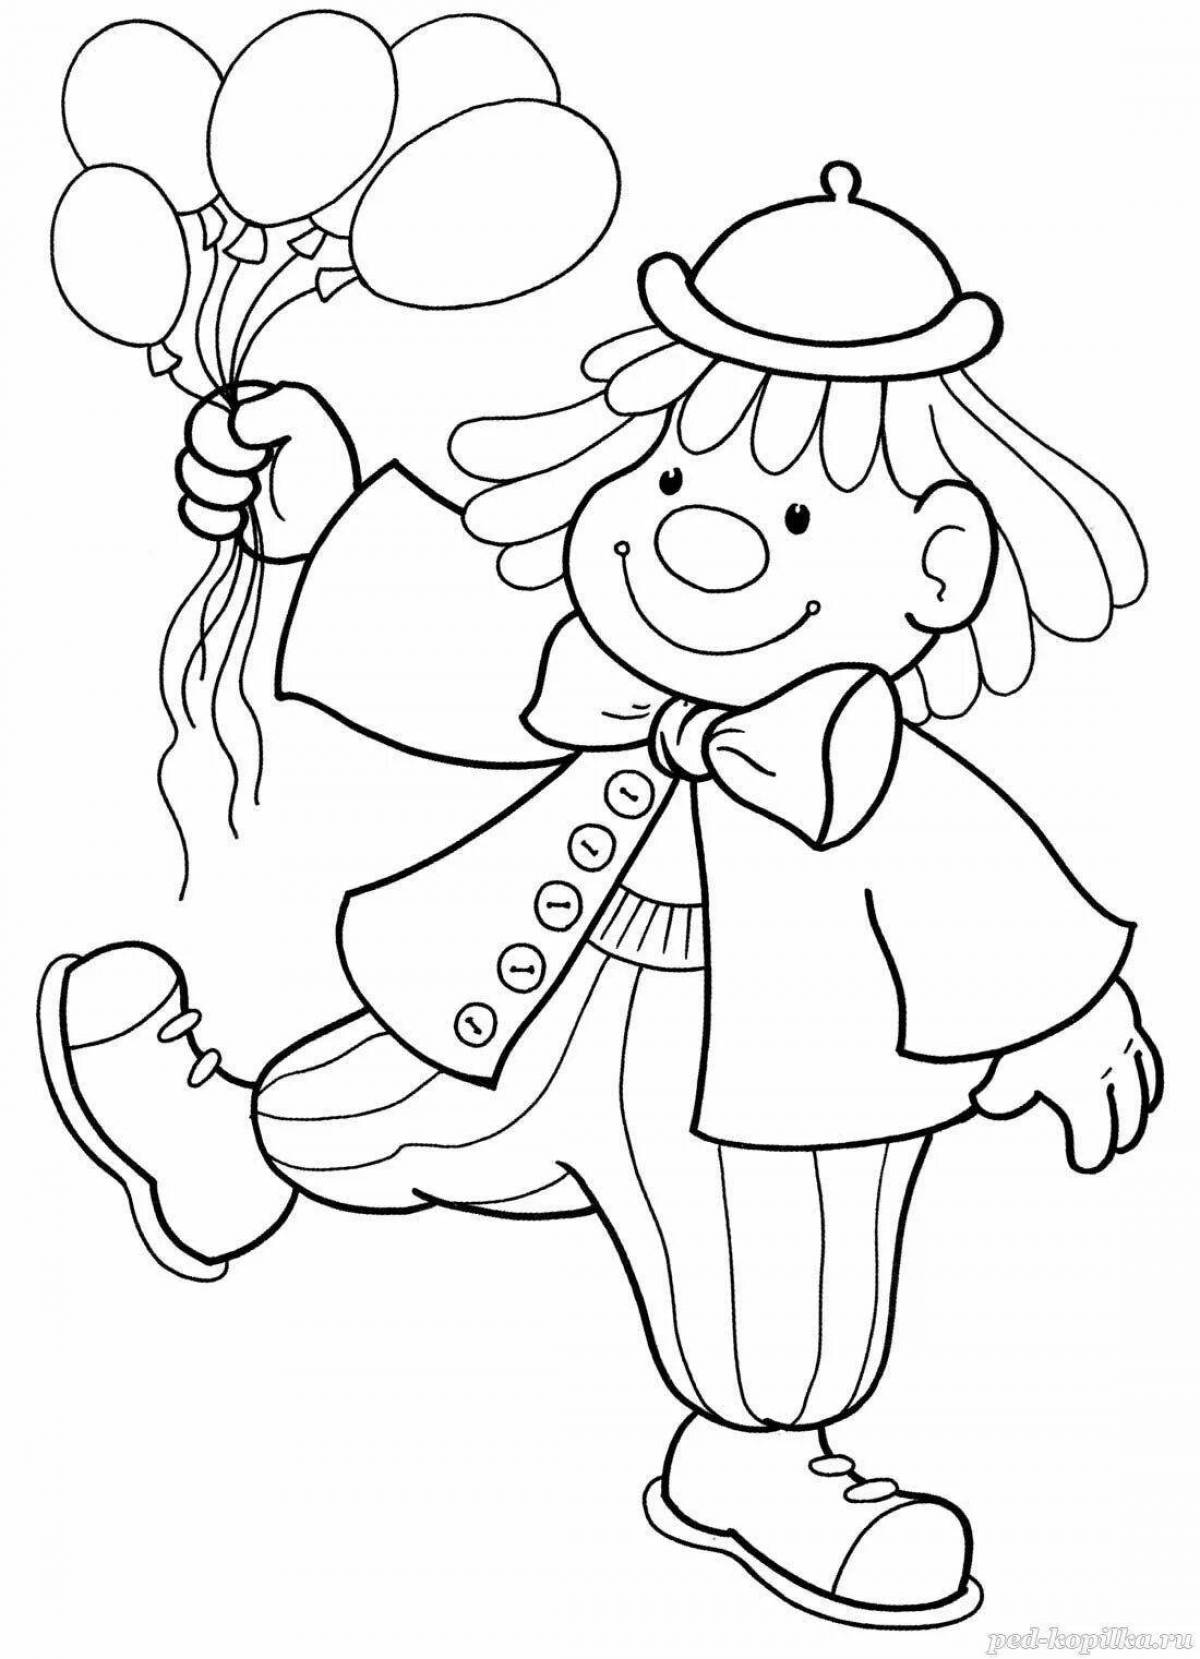 Adorable jester coloring book